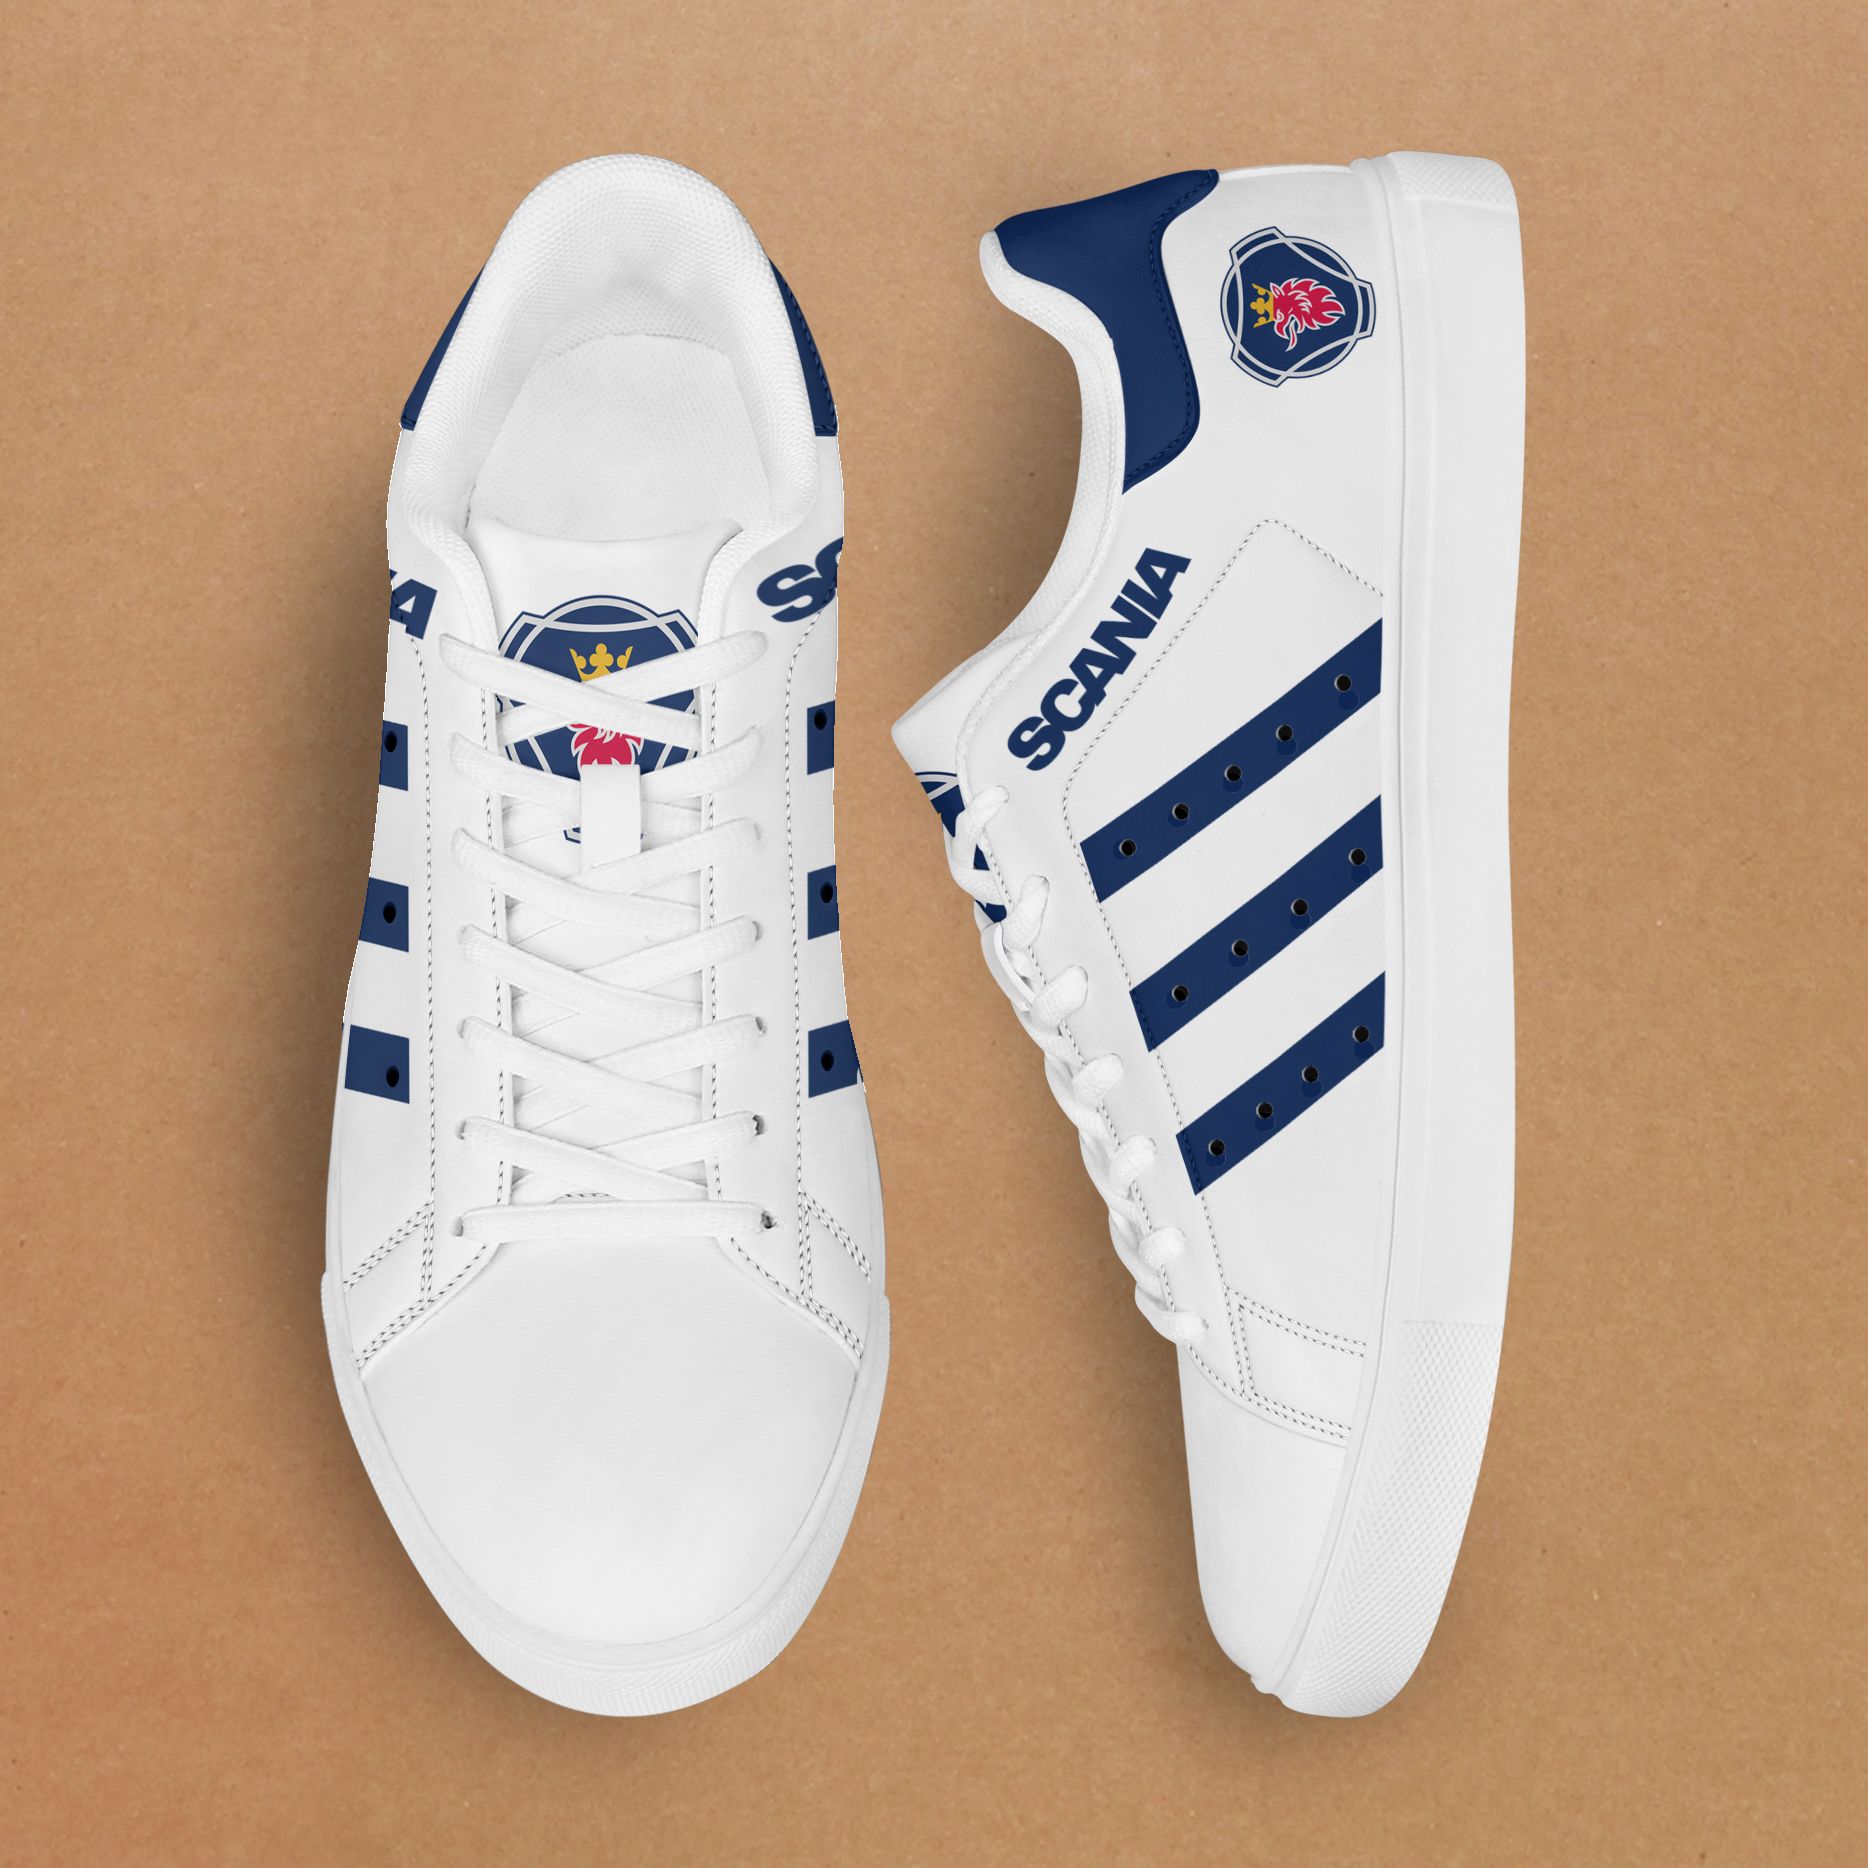 SCANIA white and navy line Stan Smith Shoes 1